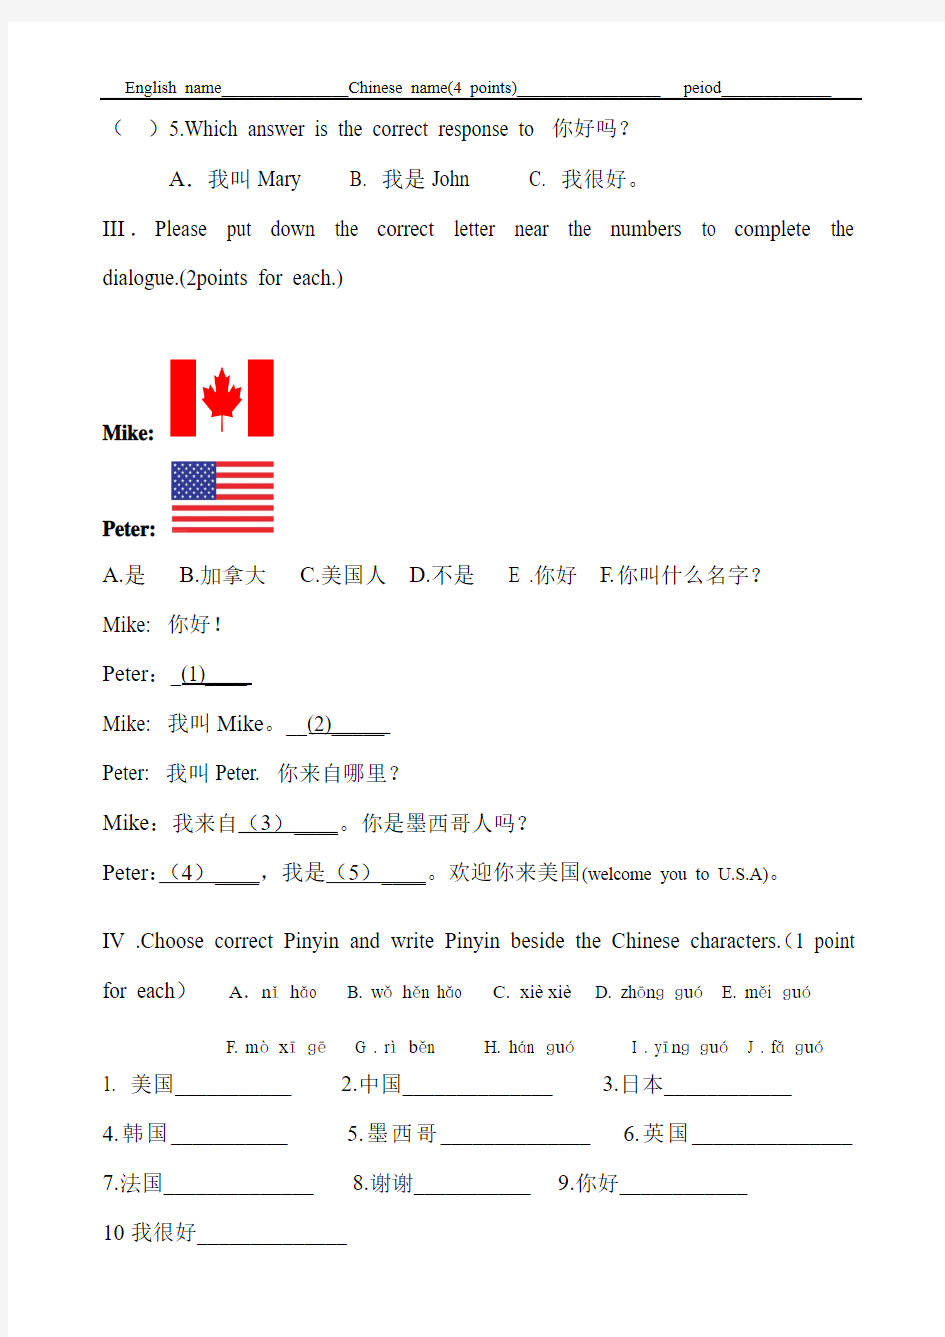 Test 1 for Chinese I   问候介绍国籍